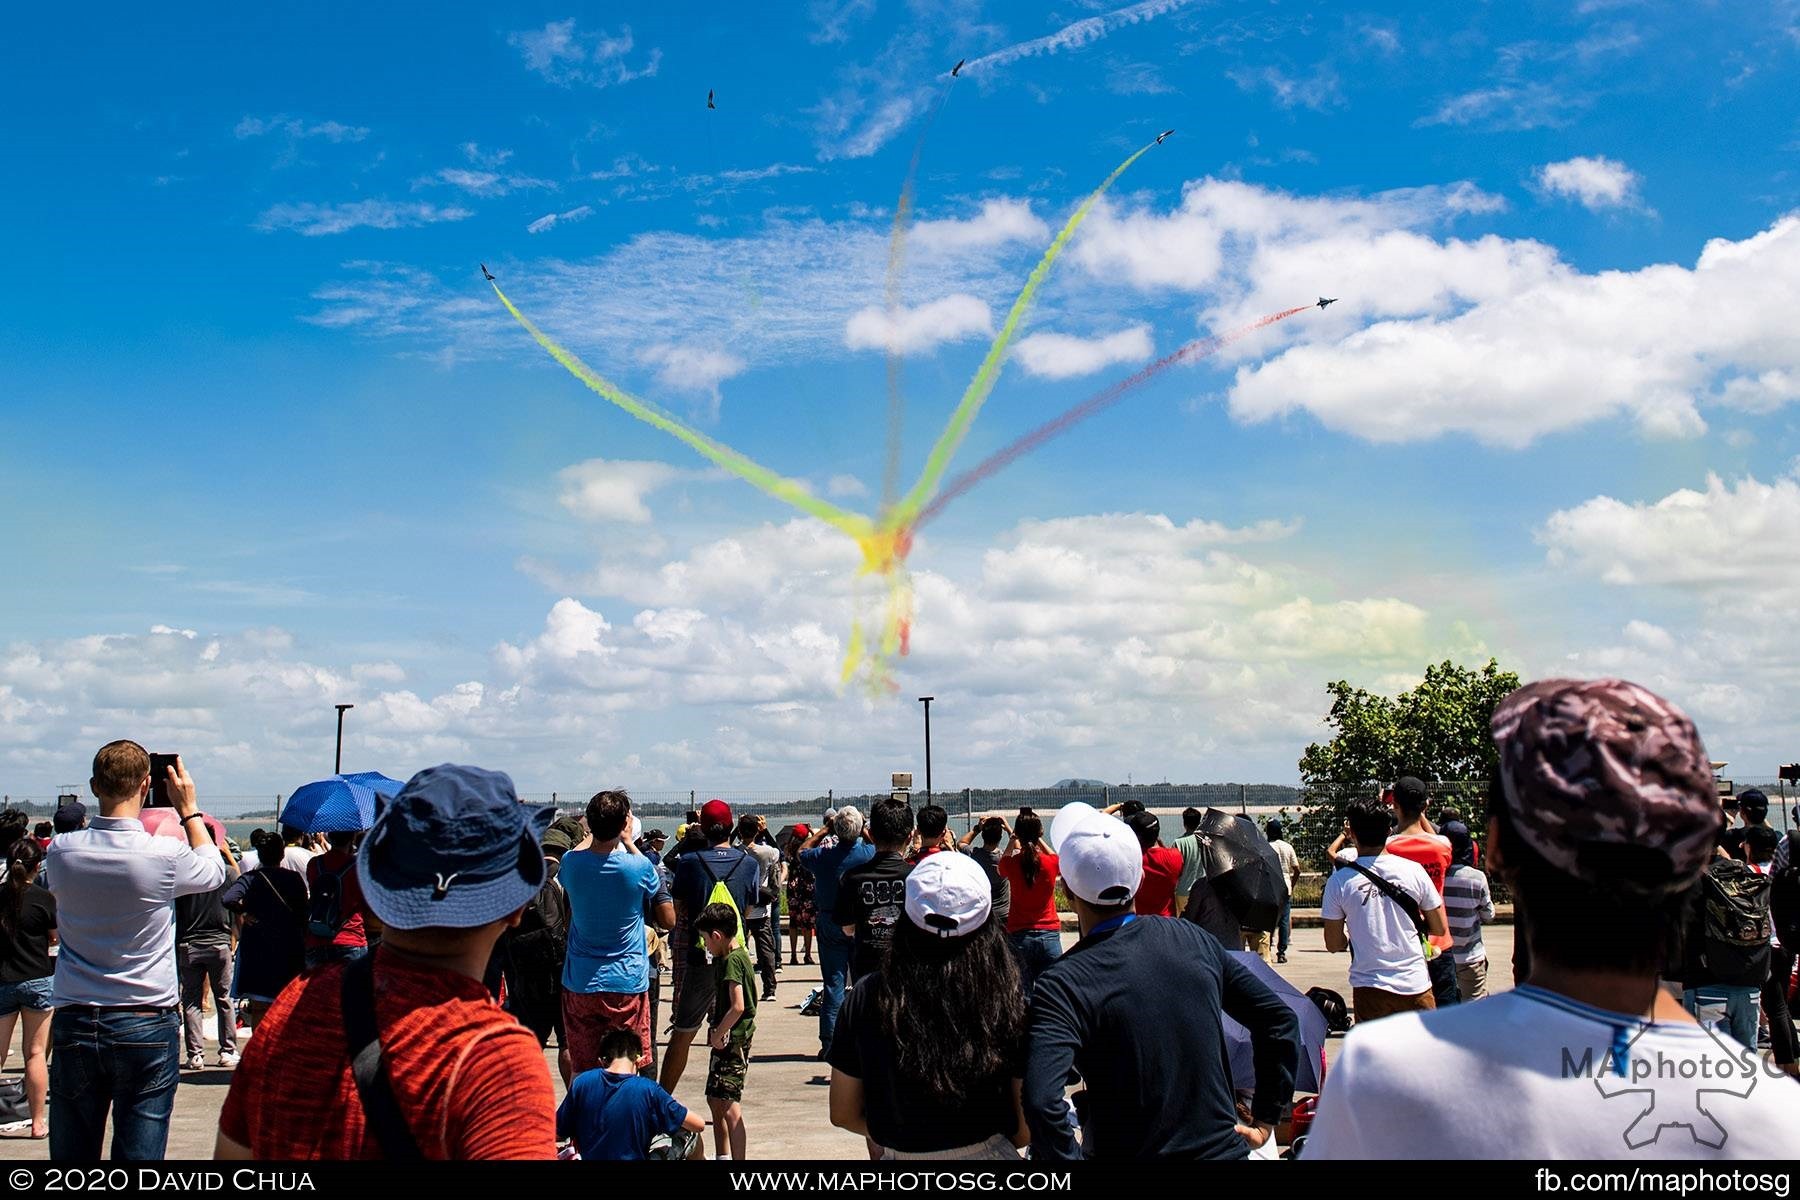 PLAAF Ba Yi Aerobatics Team Finale signifying the blossoming of friendship between Singapore and China